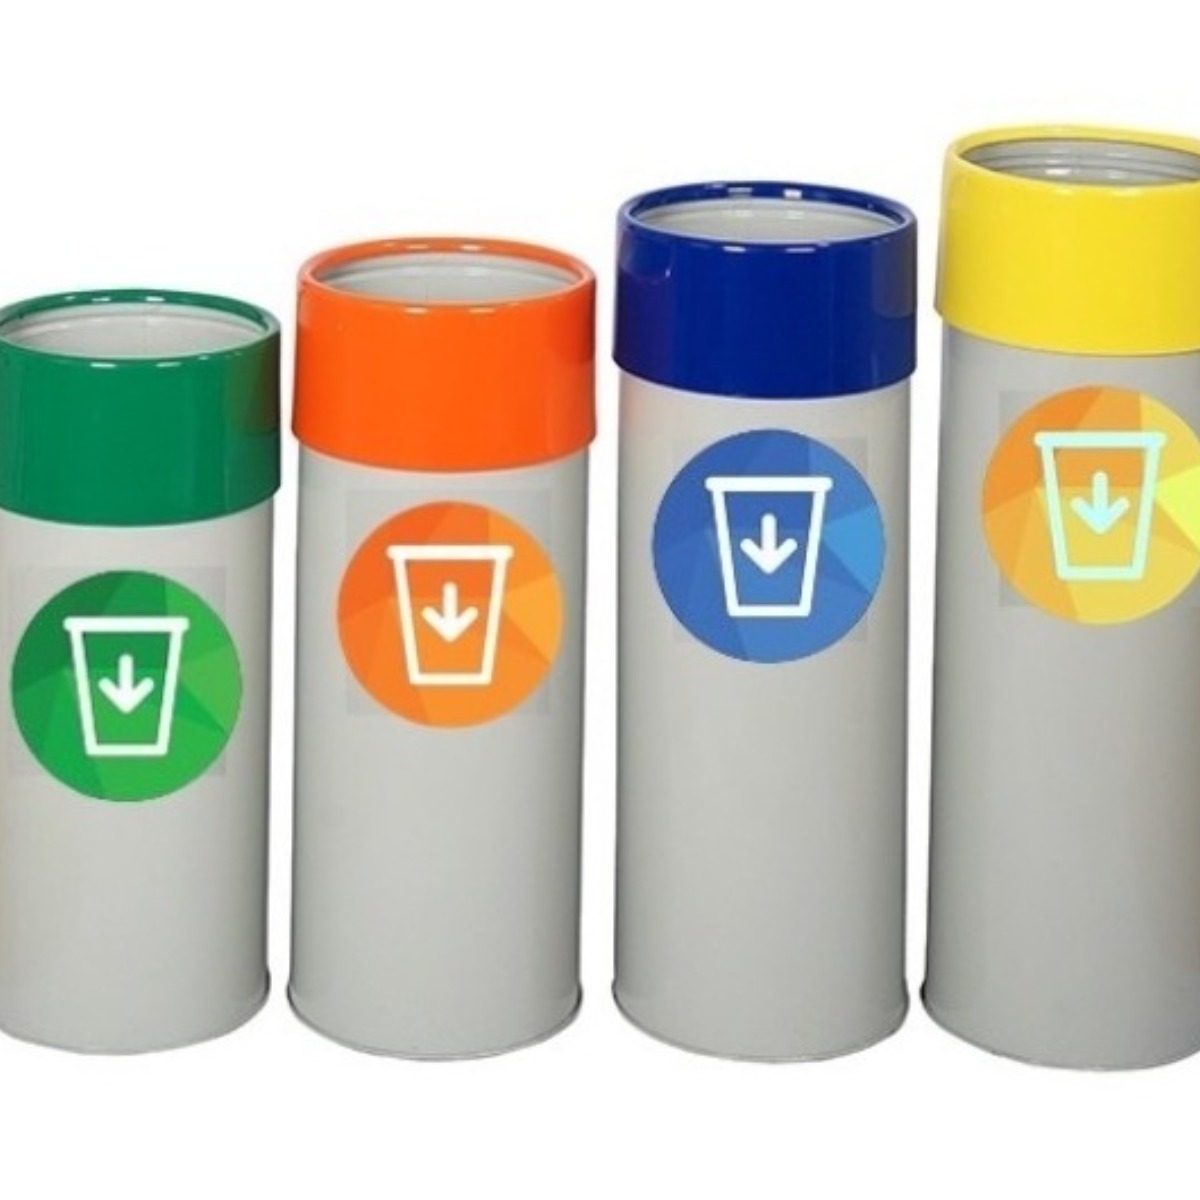 AB-758 4’Part Recycle Bin product logo